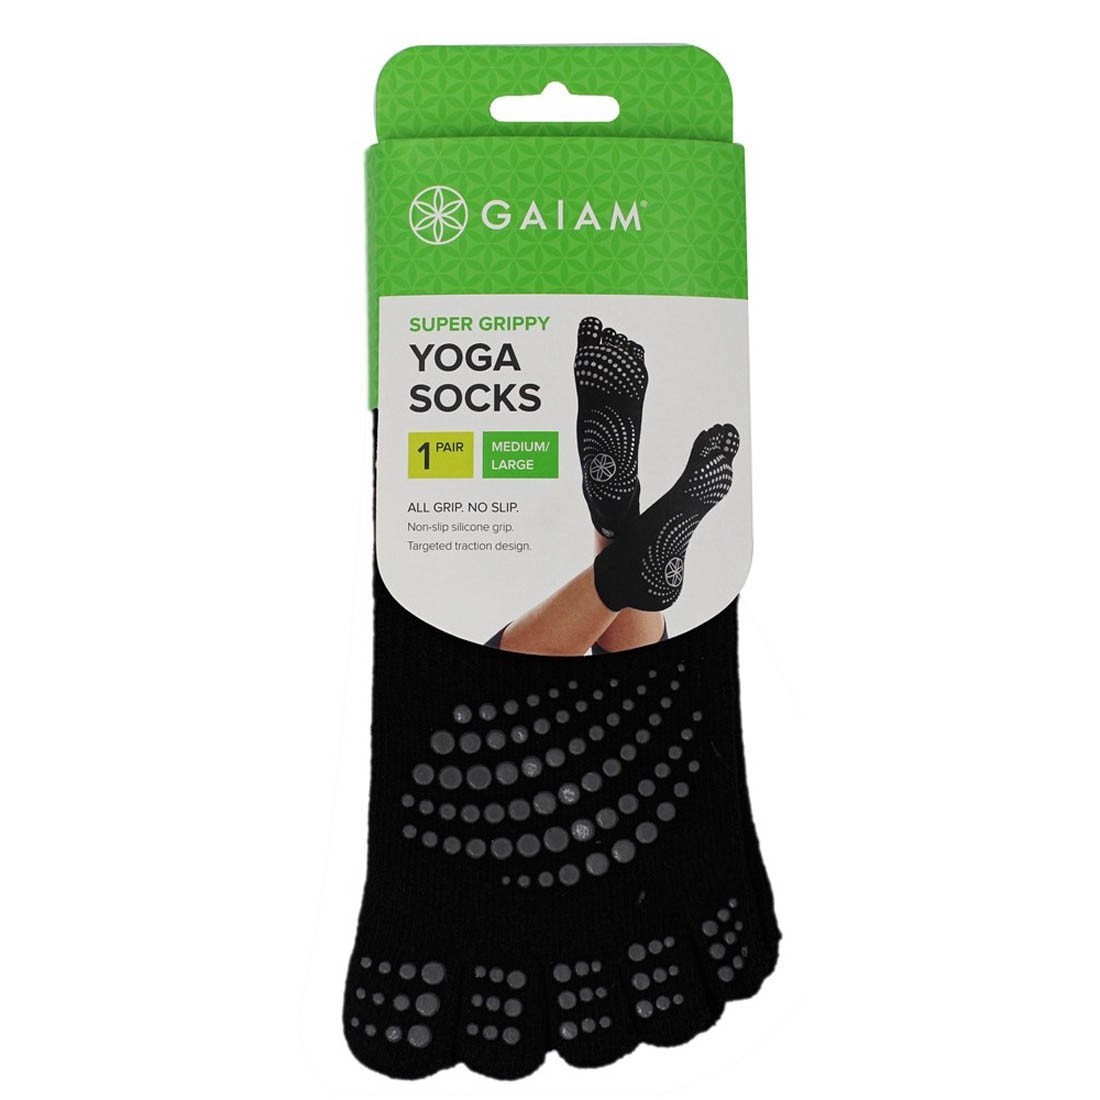 Order GAIAM Greppy Yoga Socks -M/L - GAIAM, delivered to your home